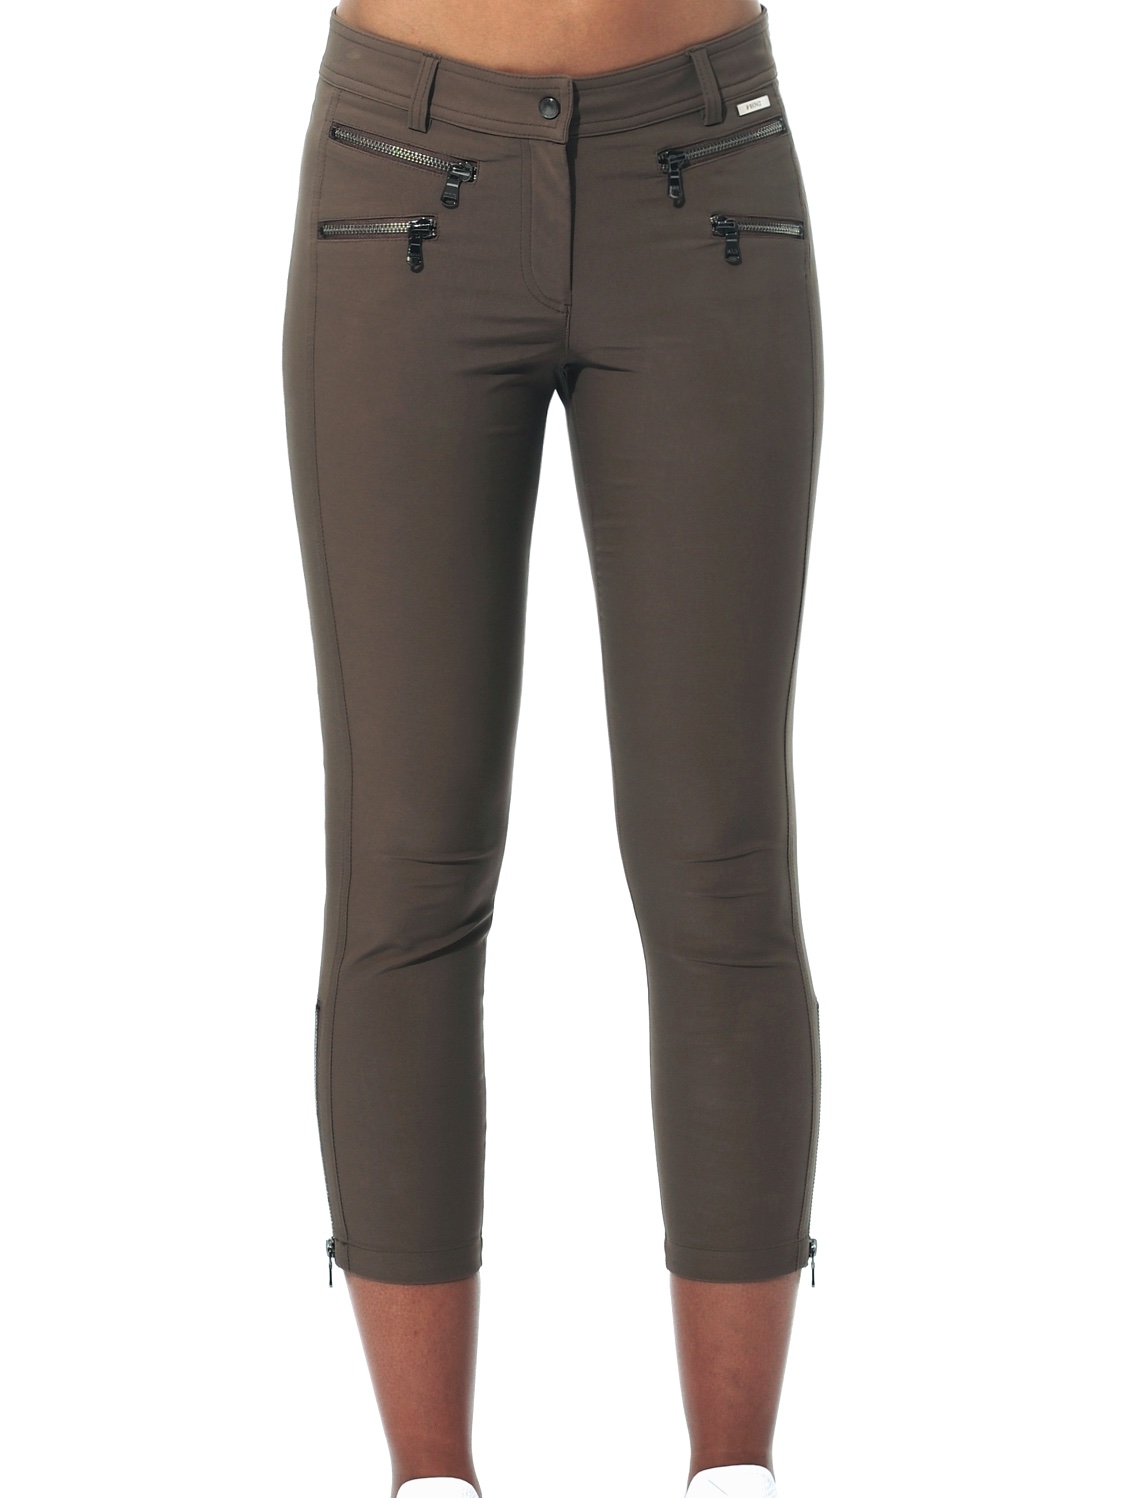 4way stretch double zip cropped pants chocolate 